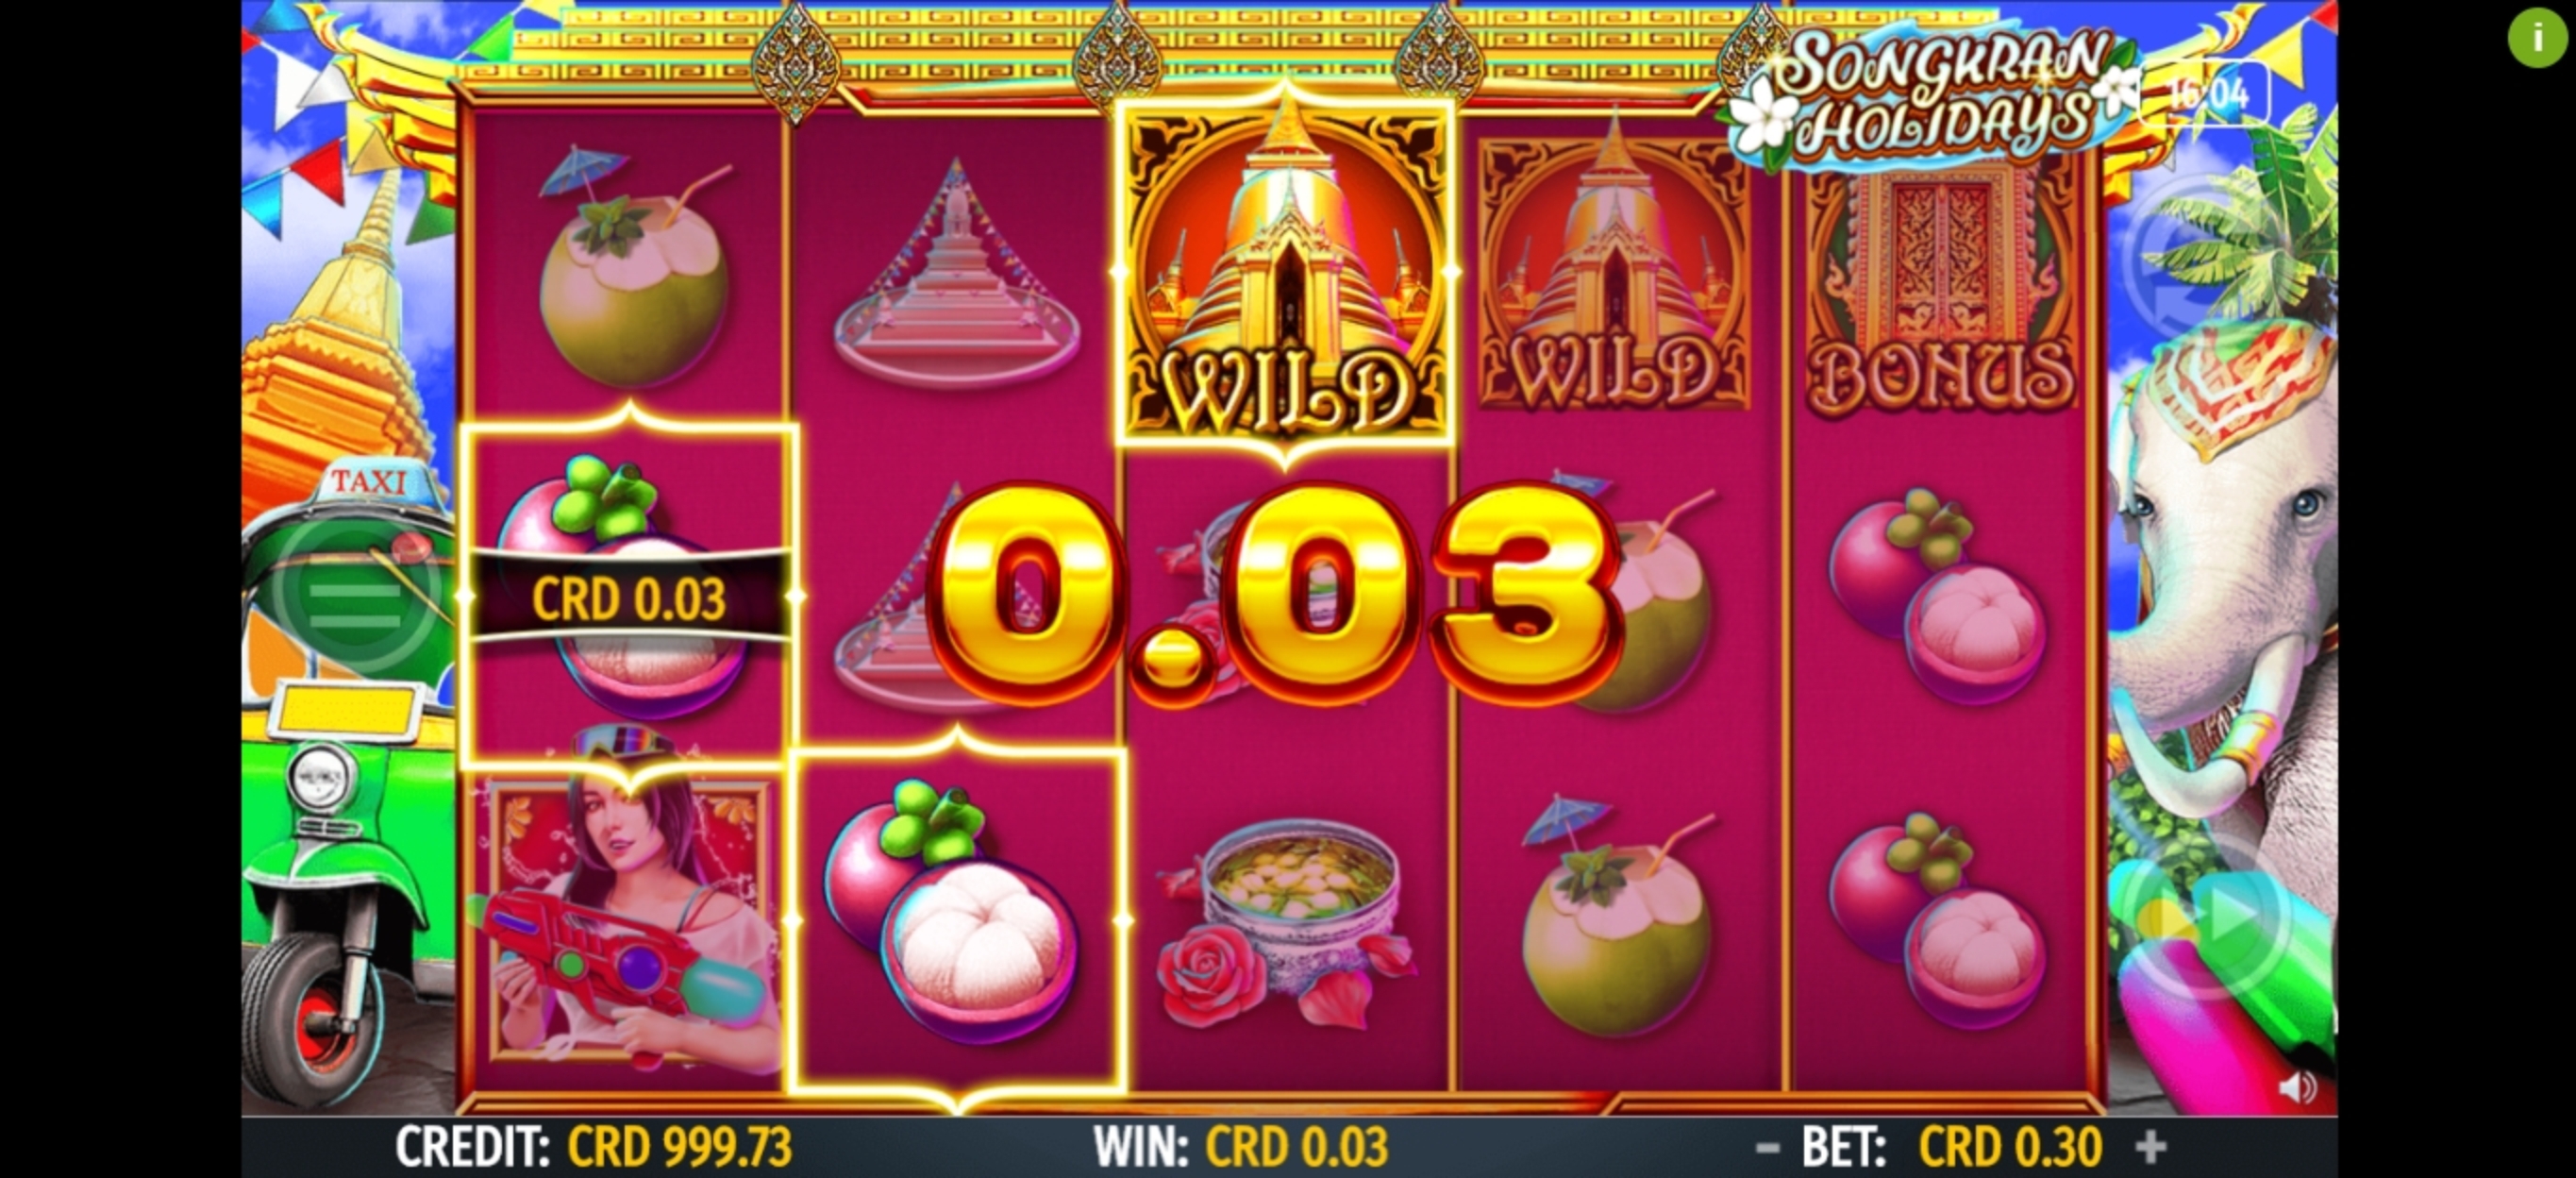 Win Money in Songkran Holidays Free Slot Game by Octavian Gaming